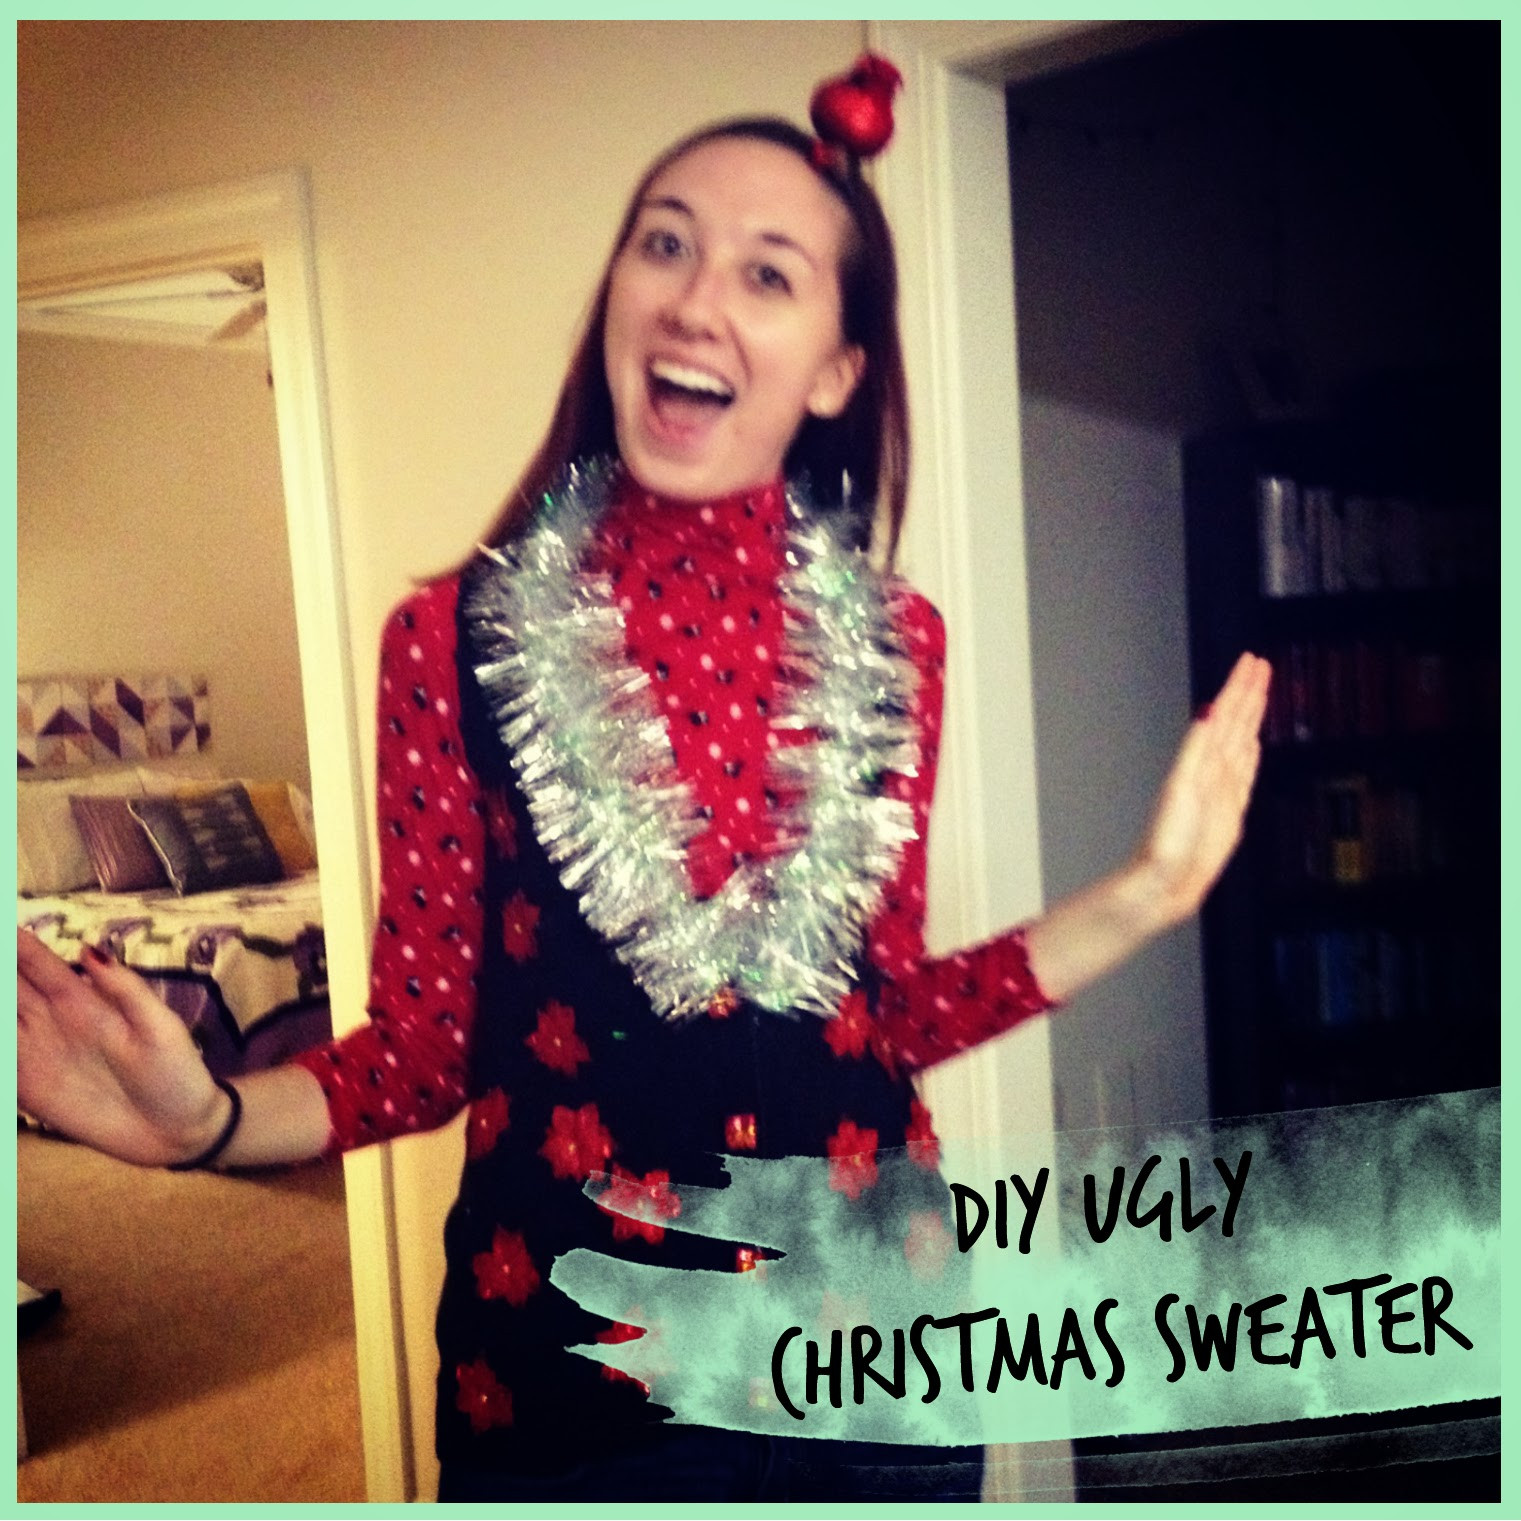 DIY Ugly Christmas Sweater
 My Rolling Home DIY Ugly Christmas Sweater vest